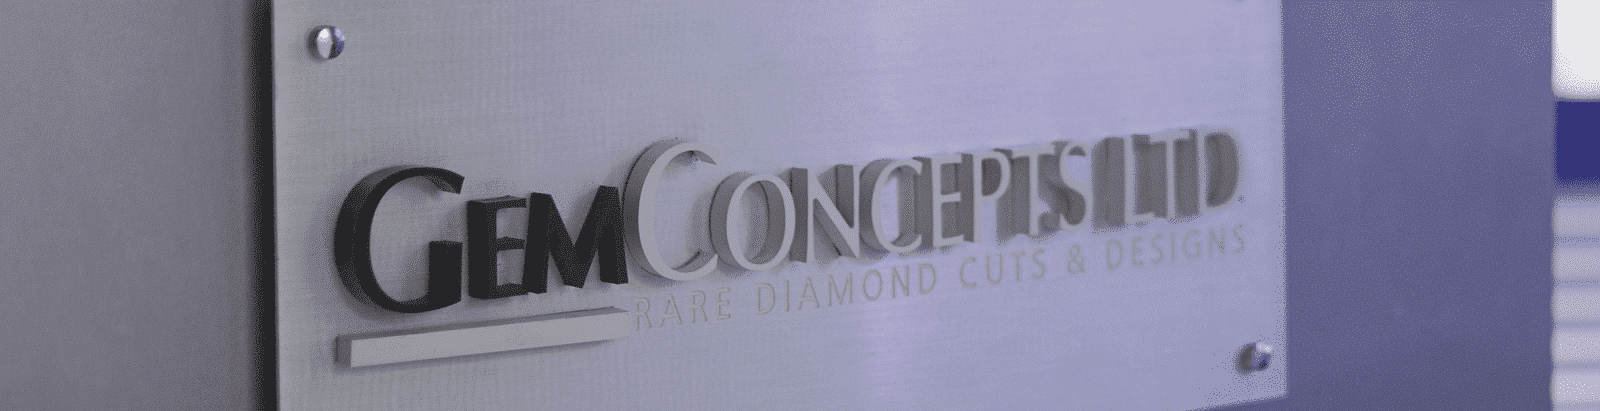 about GemConcepts